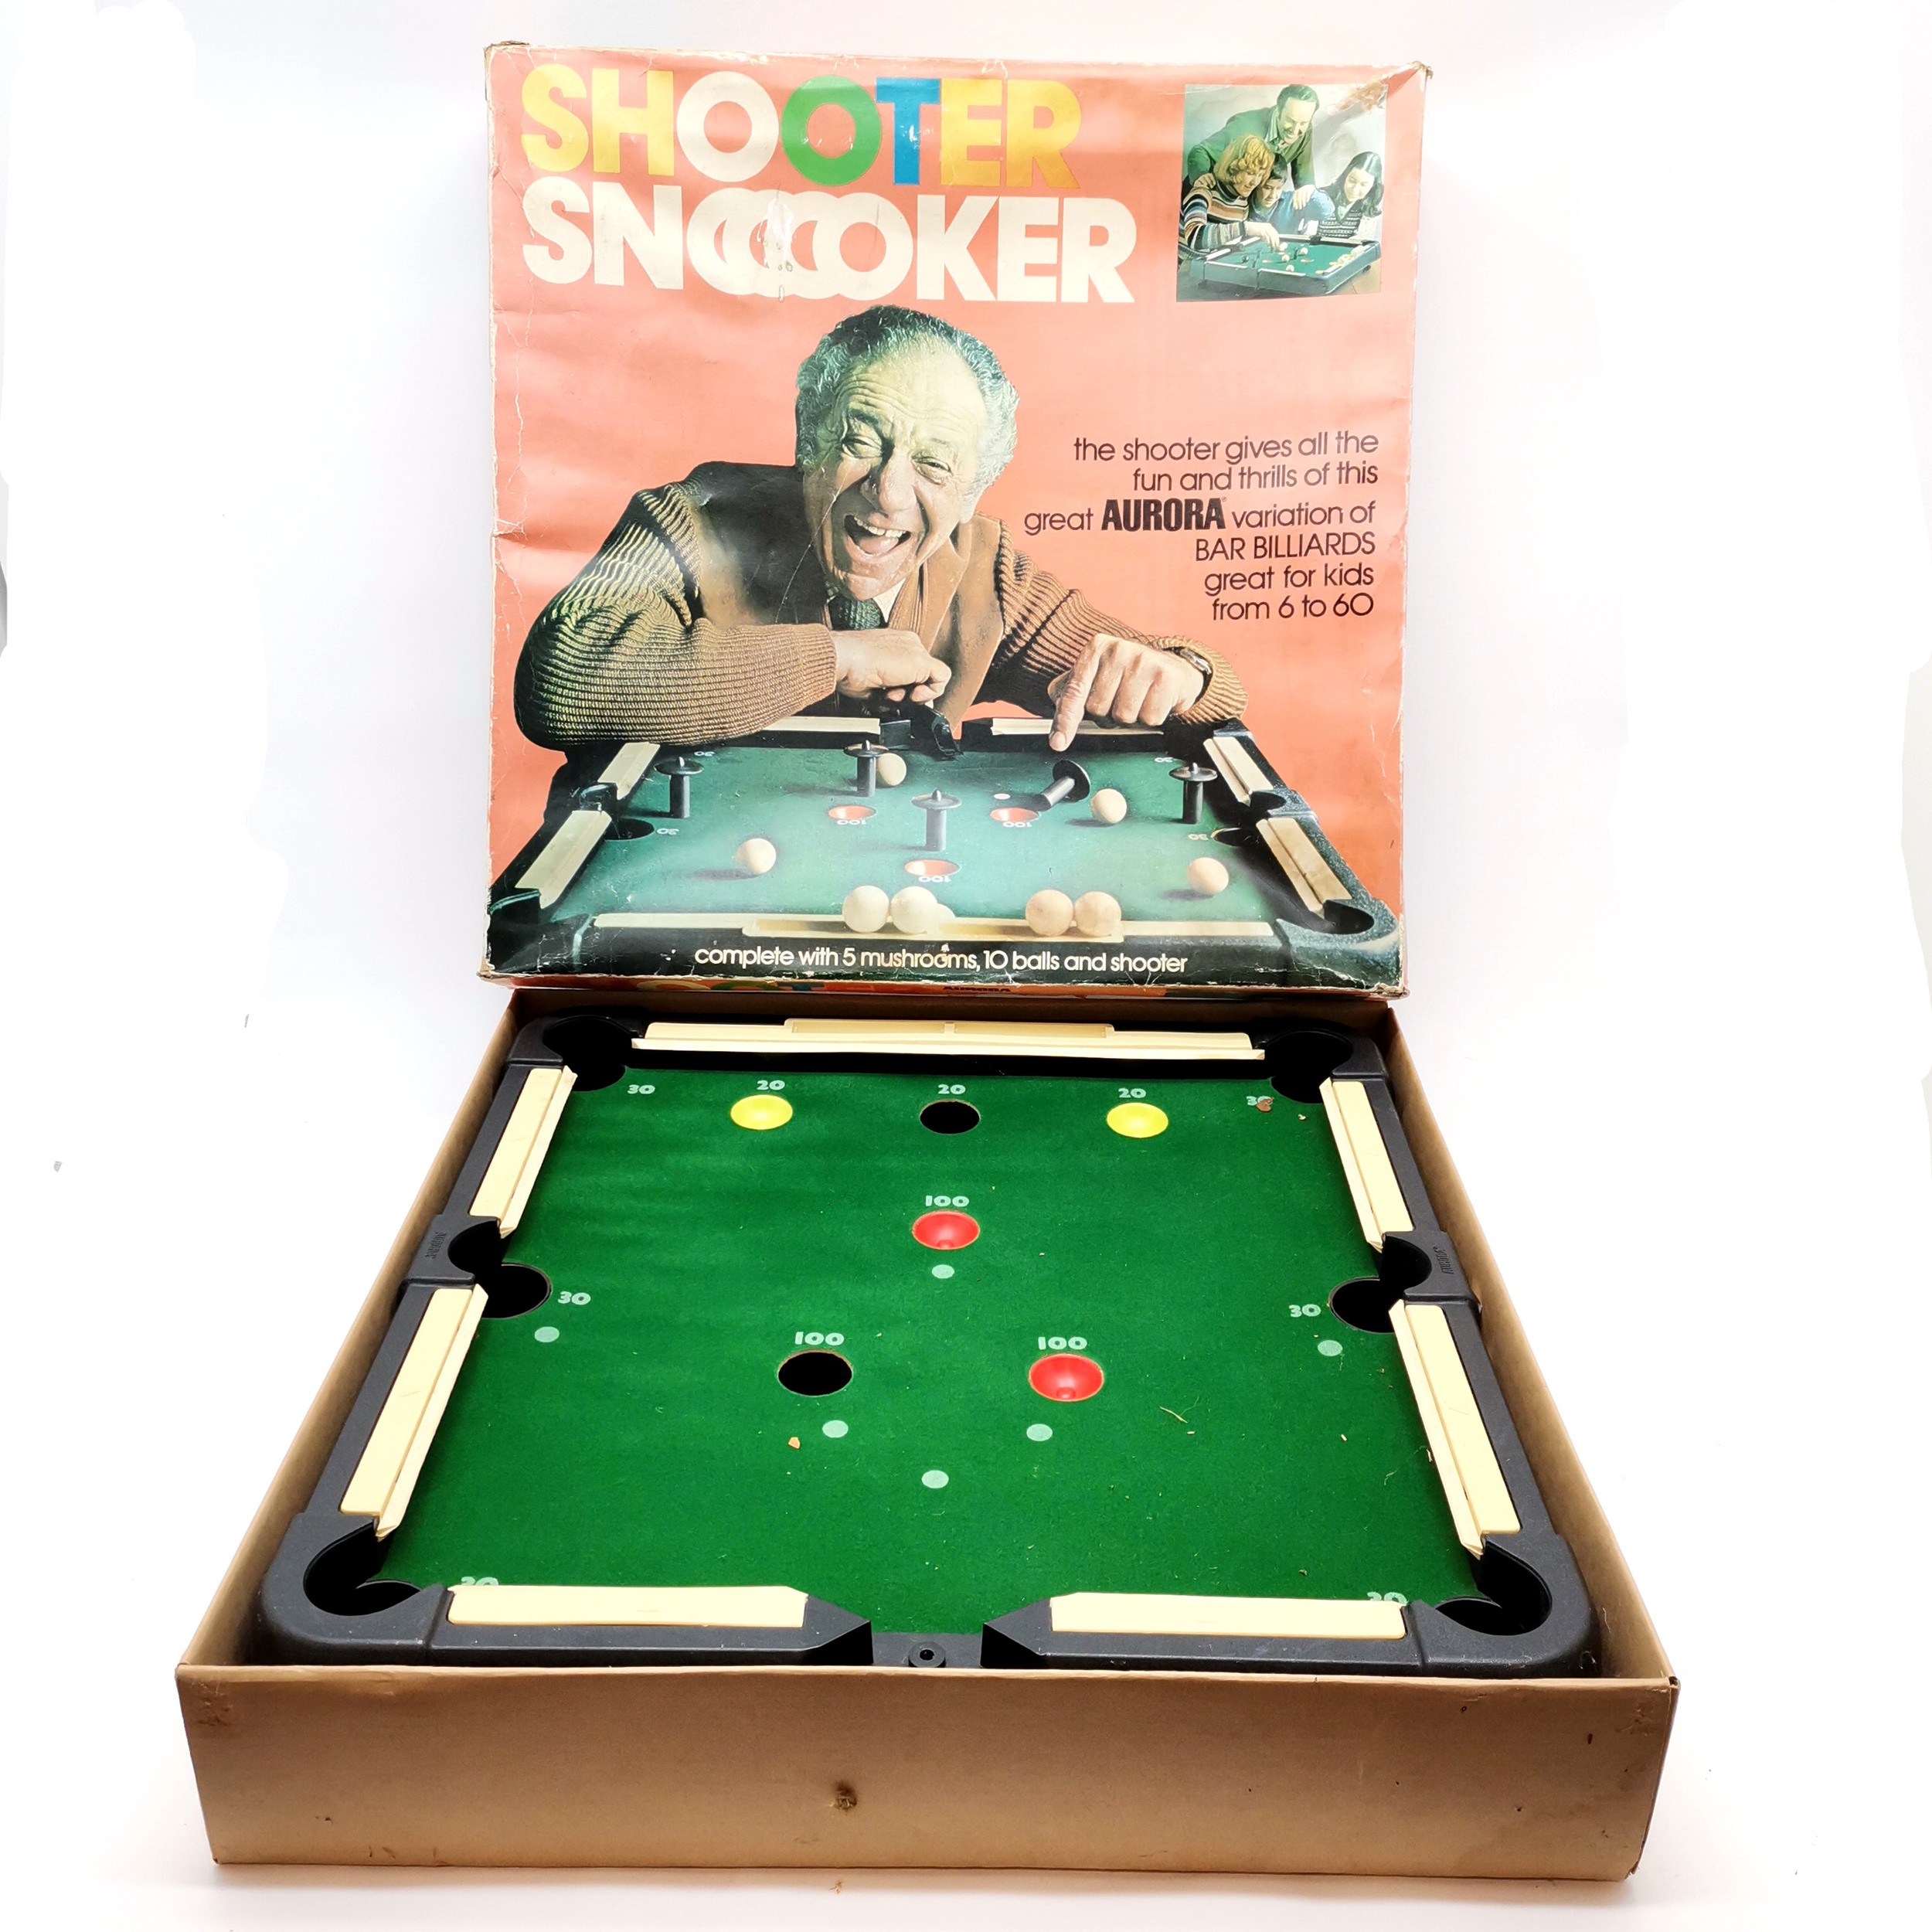 Sid James boxed Aurora Shooter Snooker - box 61cm square and has wear